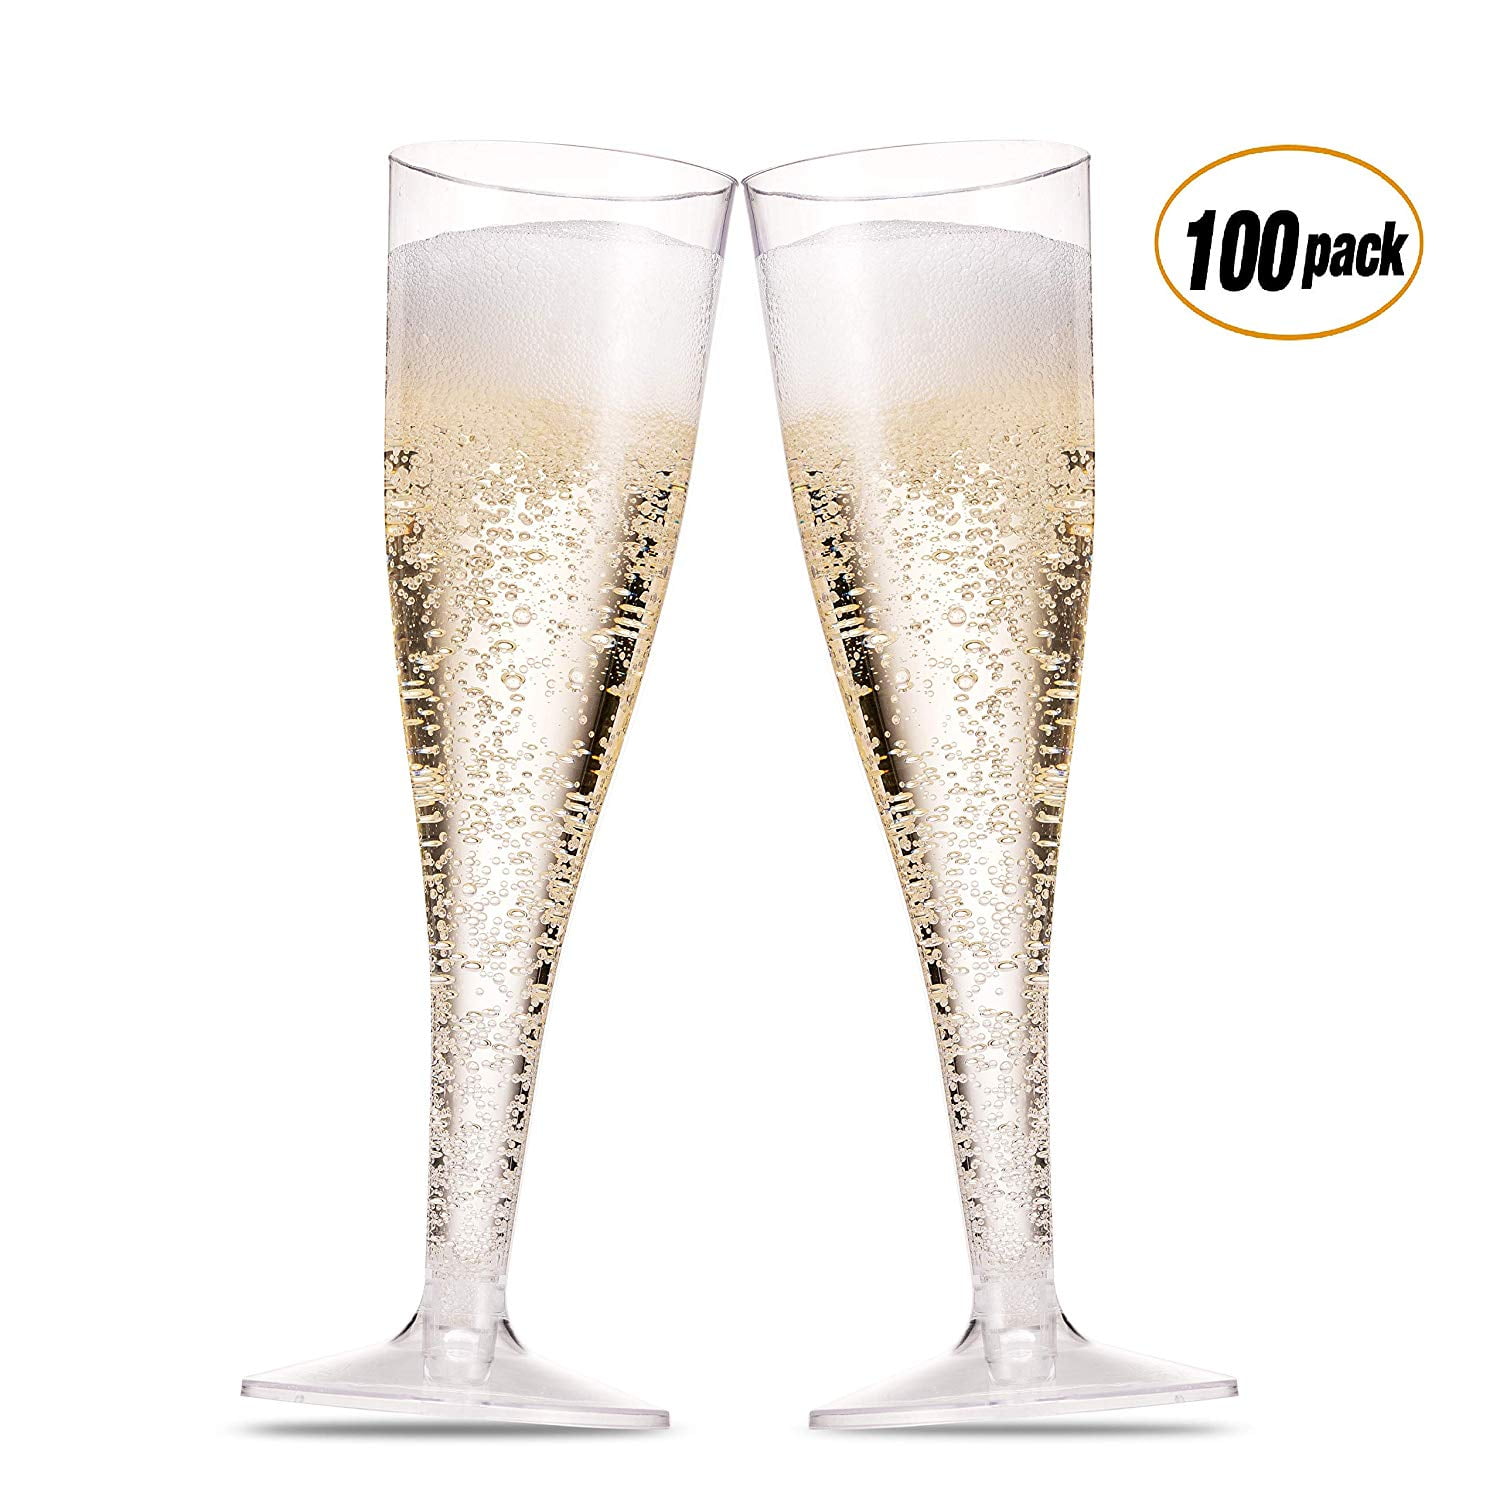 [120 PACK] Plastic Champagne Flutes 5 oz - Hard Plastic Disposable Clear  Plastic Glass Like Flutes - Champagne Glasses BPA Free Toasting Flutes 